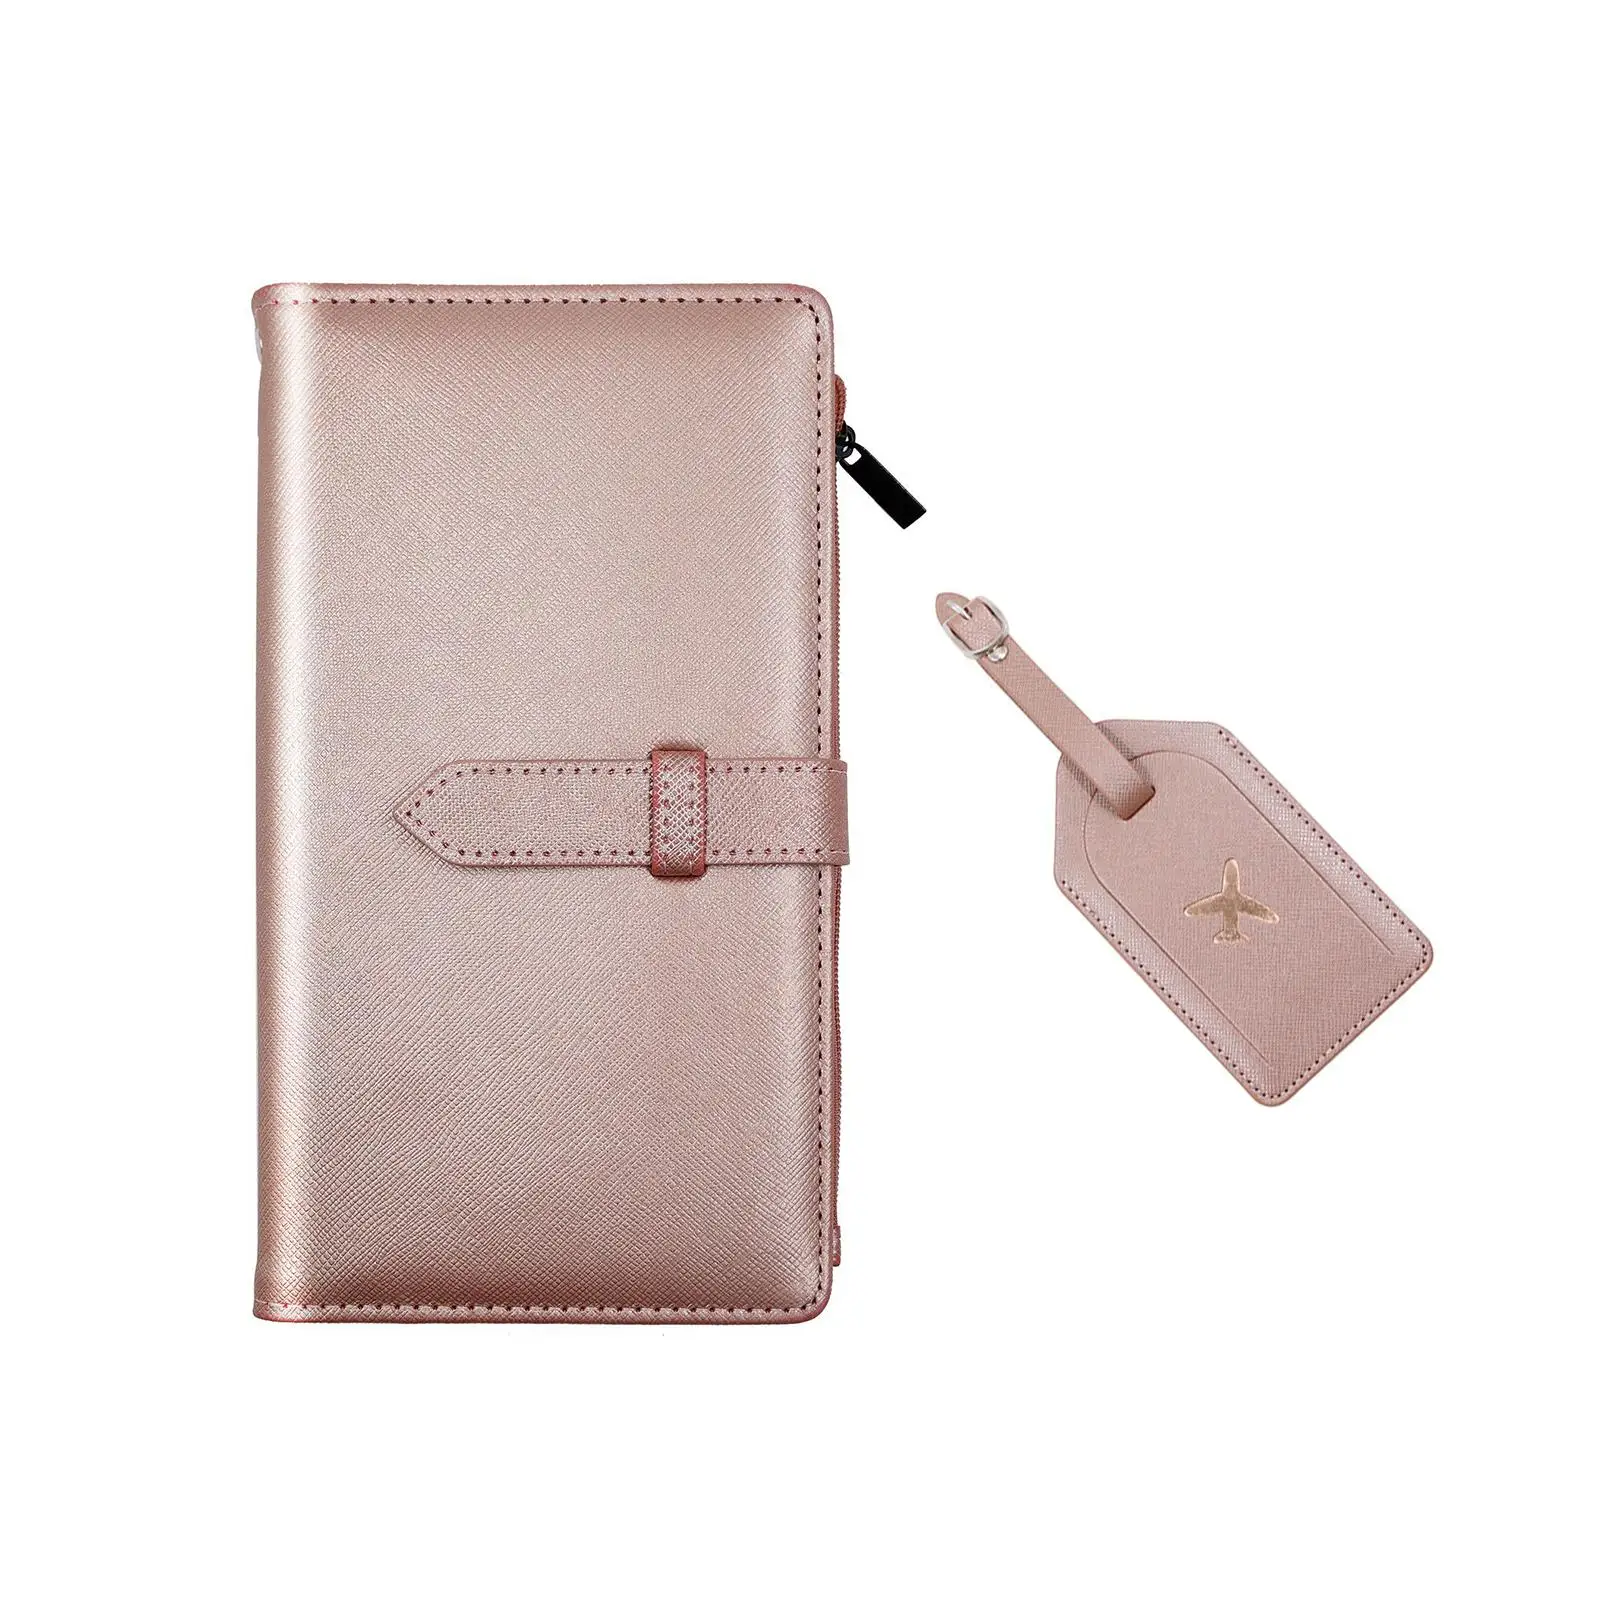 Passports Holder, Portable Card Slot Passport Wallet, Passport Cover Protector, Passport Protective Cover for Travel Business